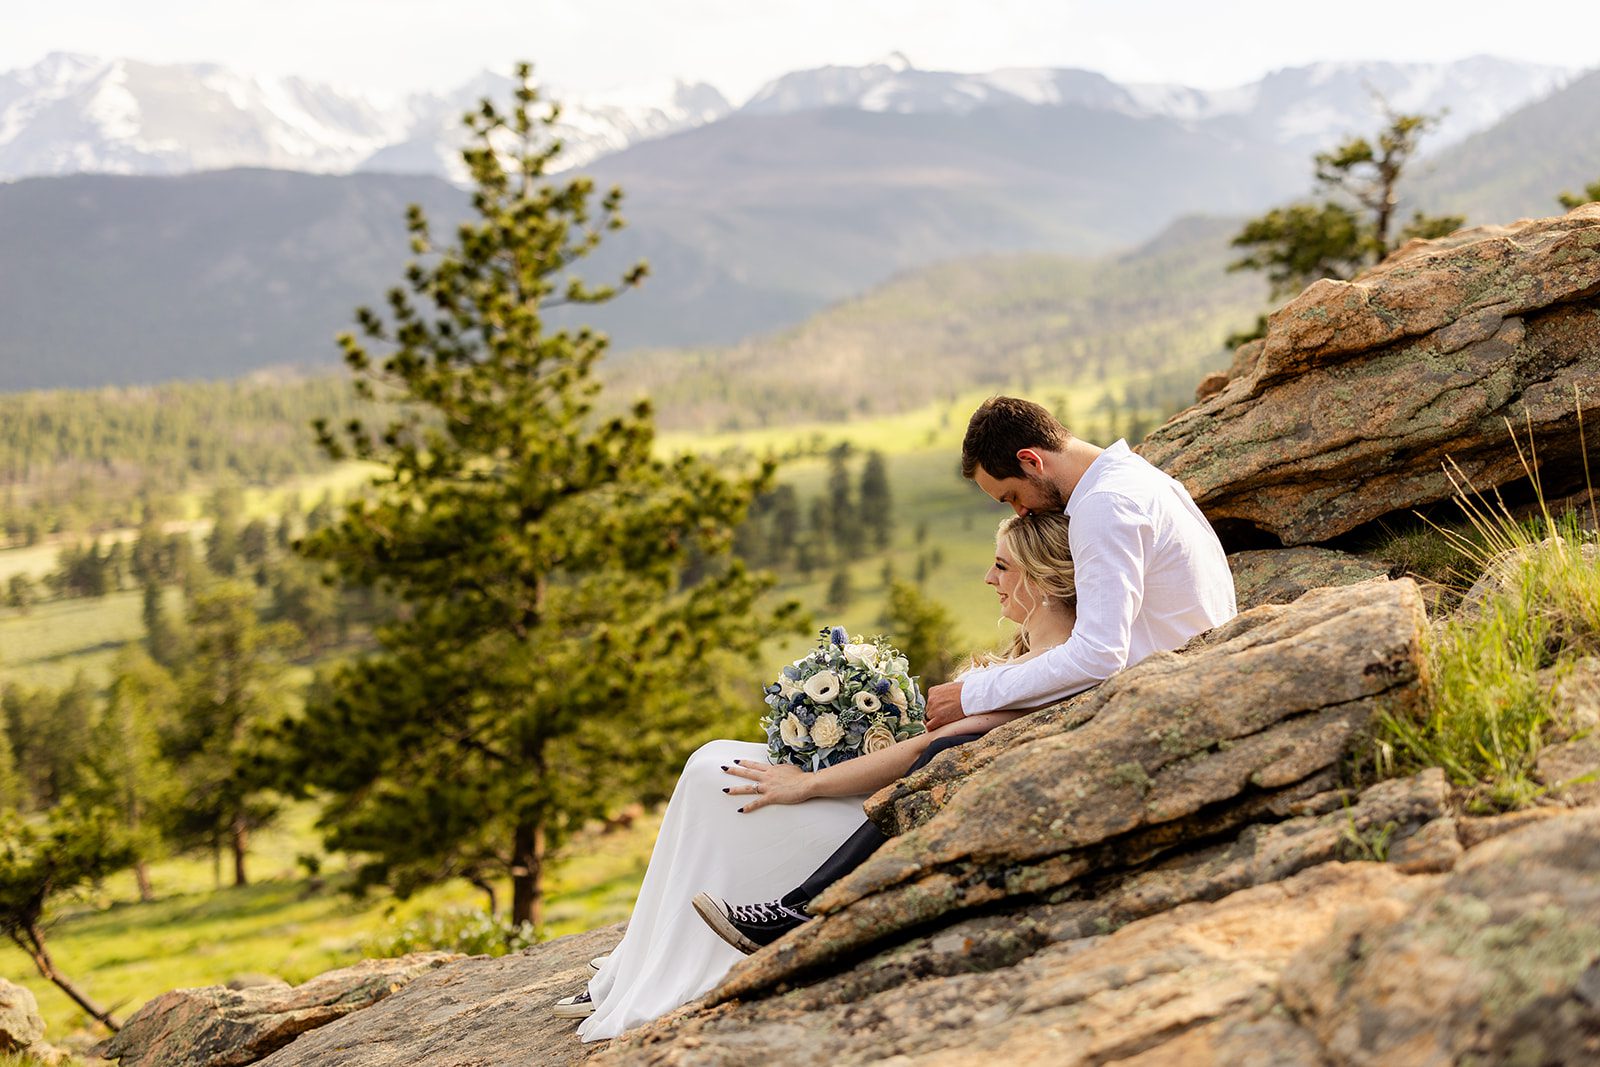 groom kisses bride on the forehead, in rocky mountain national park.